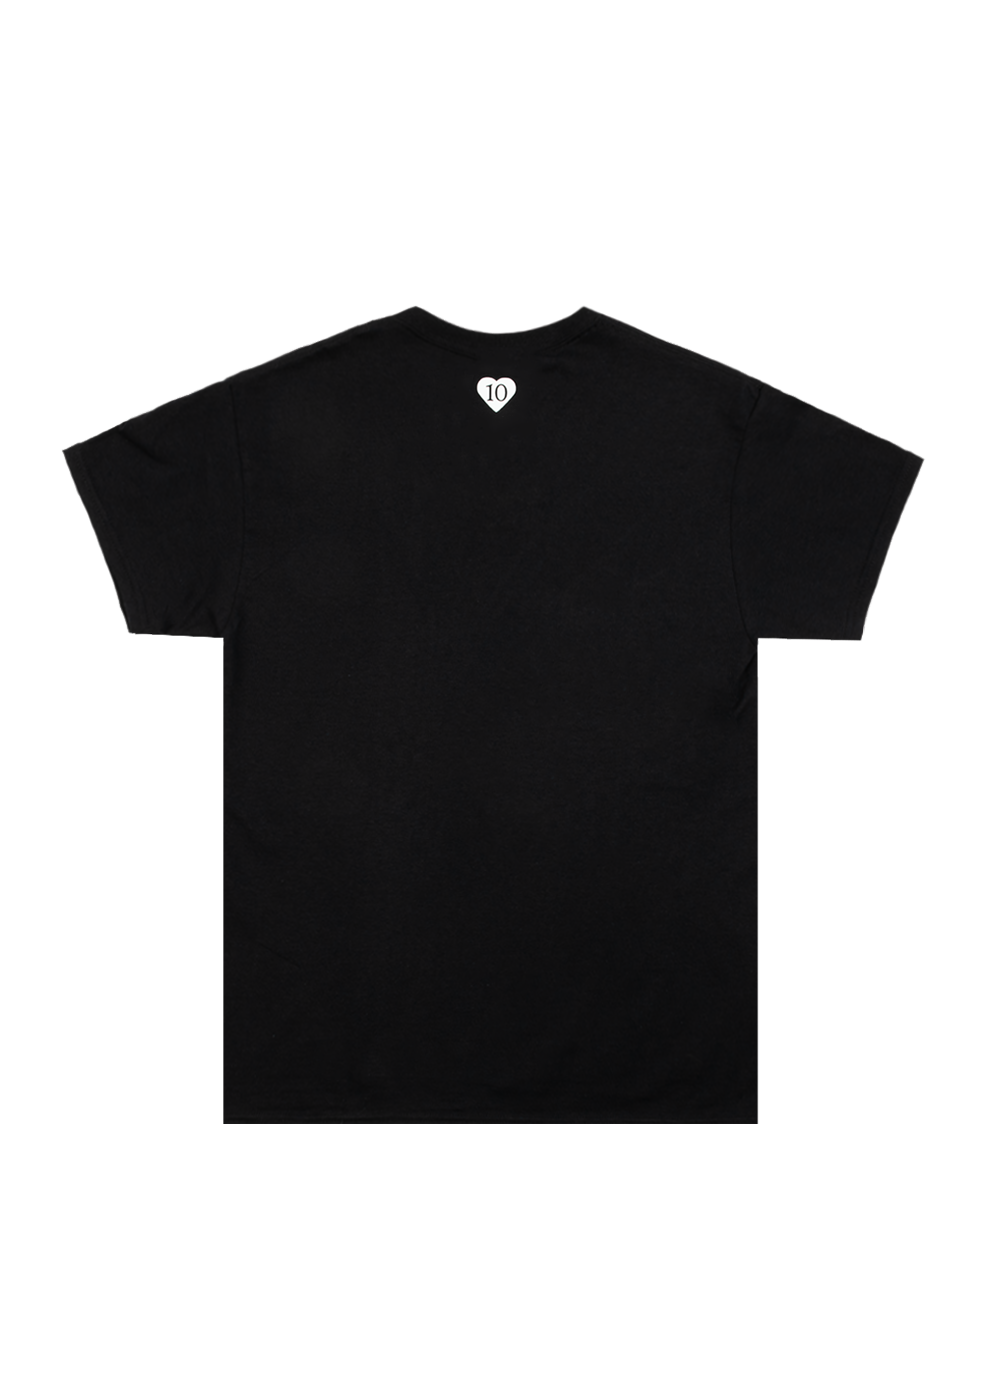 yours truly 10th anniversary puff print tee back